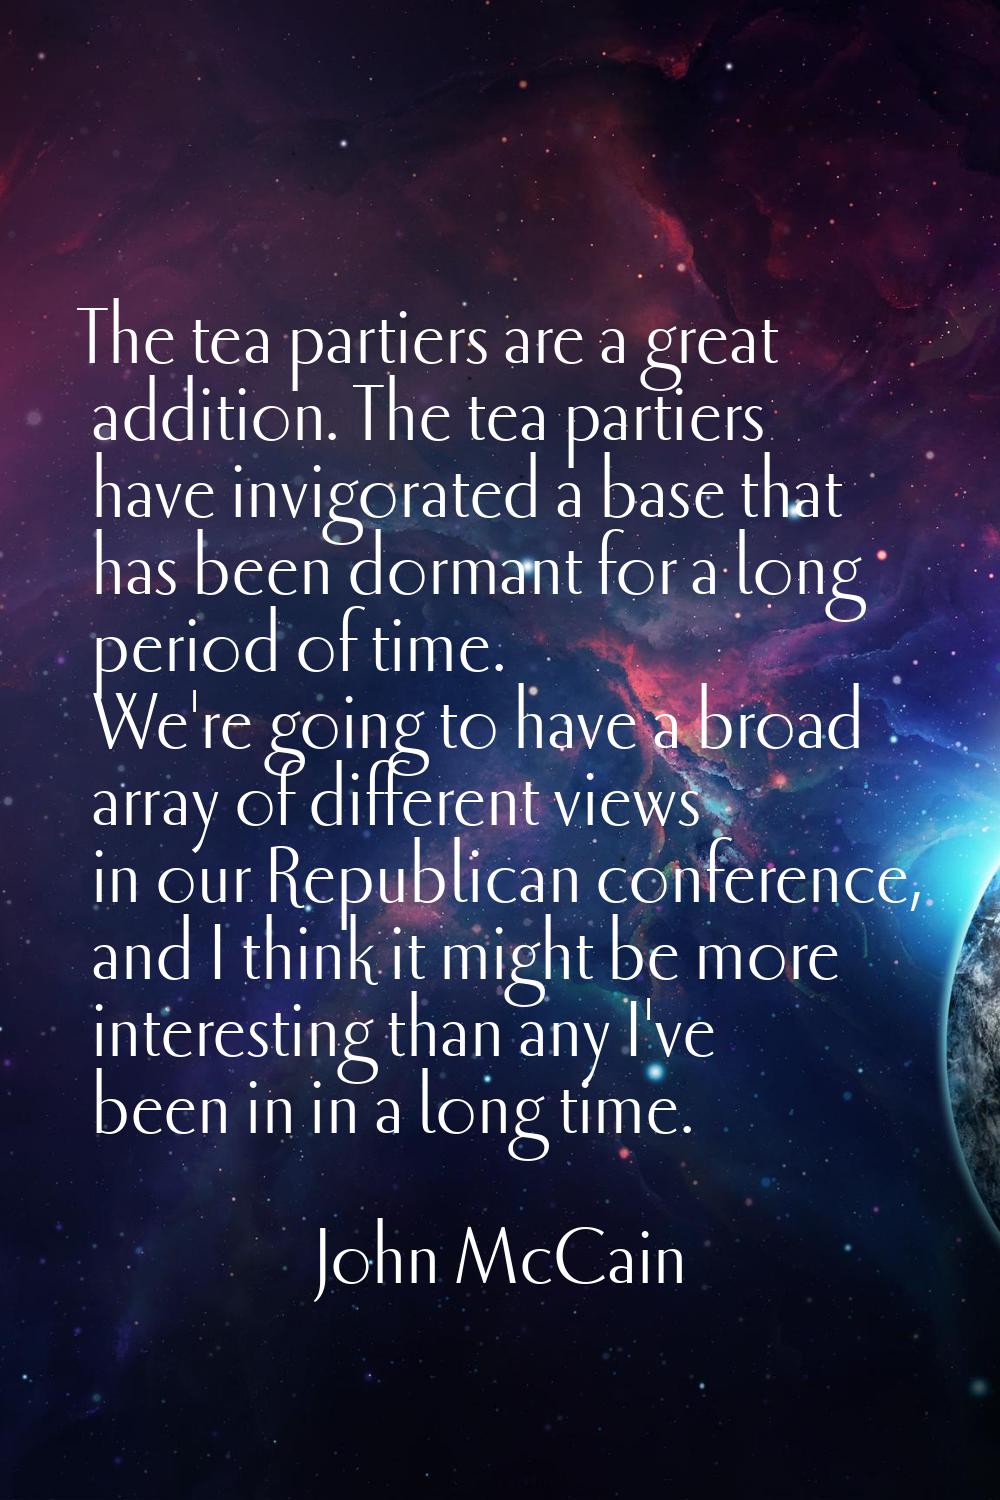 The tea partiers are a great addition. The tea partiers have invigorated a base that has been dorma